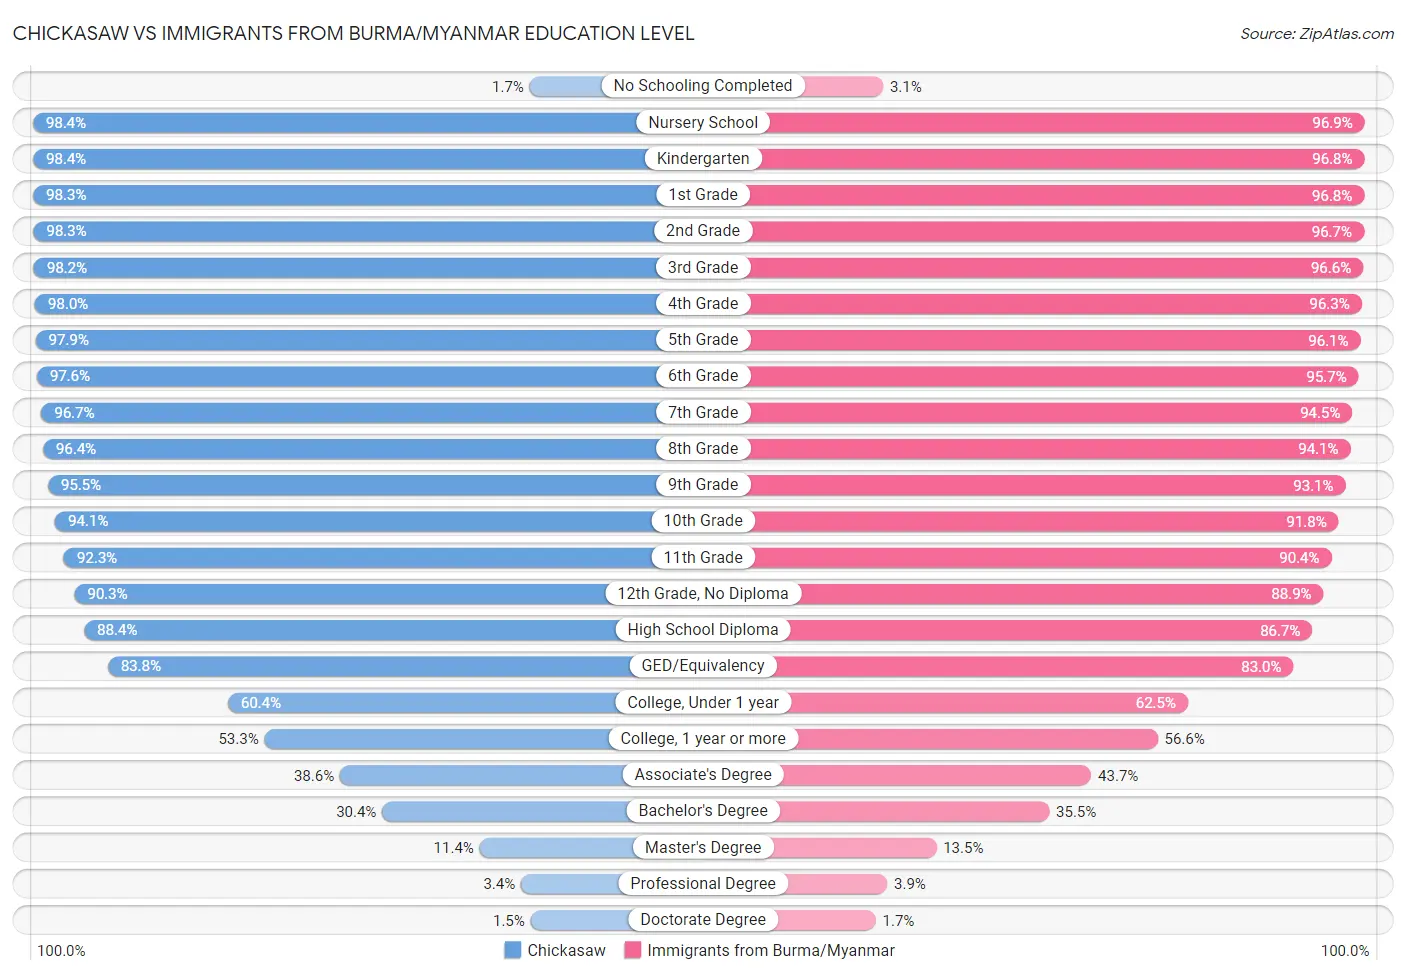 Chickasaw vs Immigrants from Burma/Myanmar Education Level